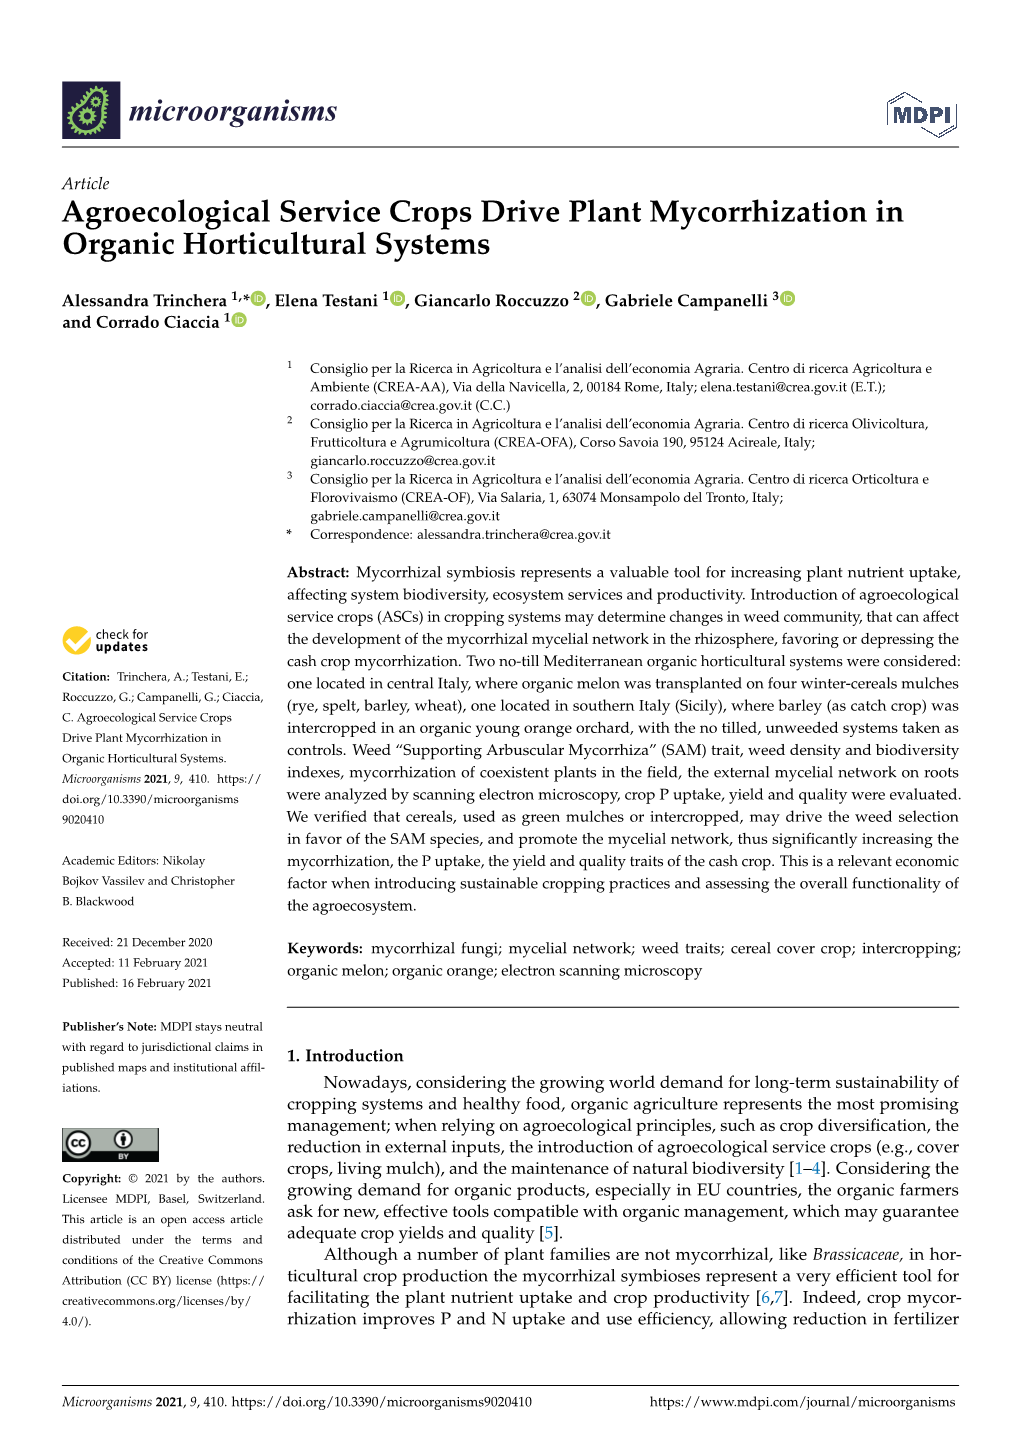 Agroecological Service Crops Drive Plant Mycorrhization in Organic Horticultural Systems